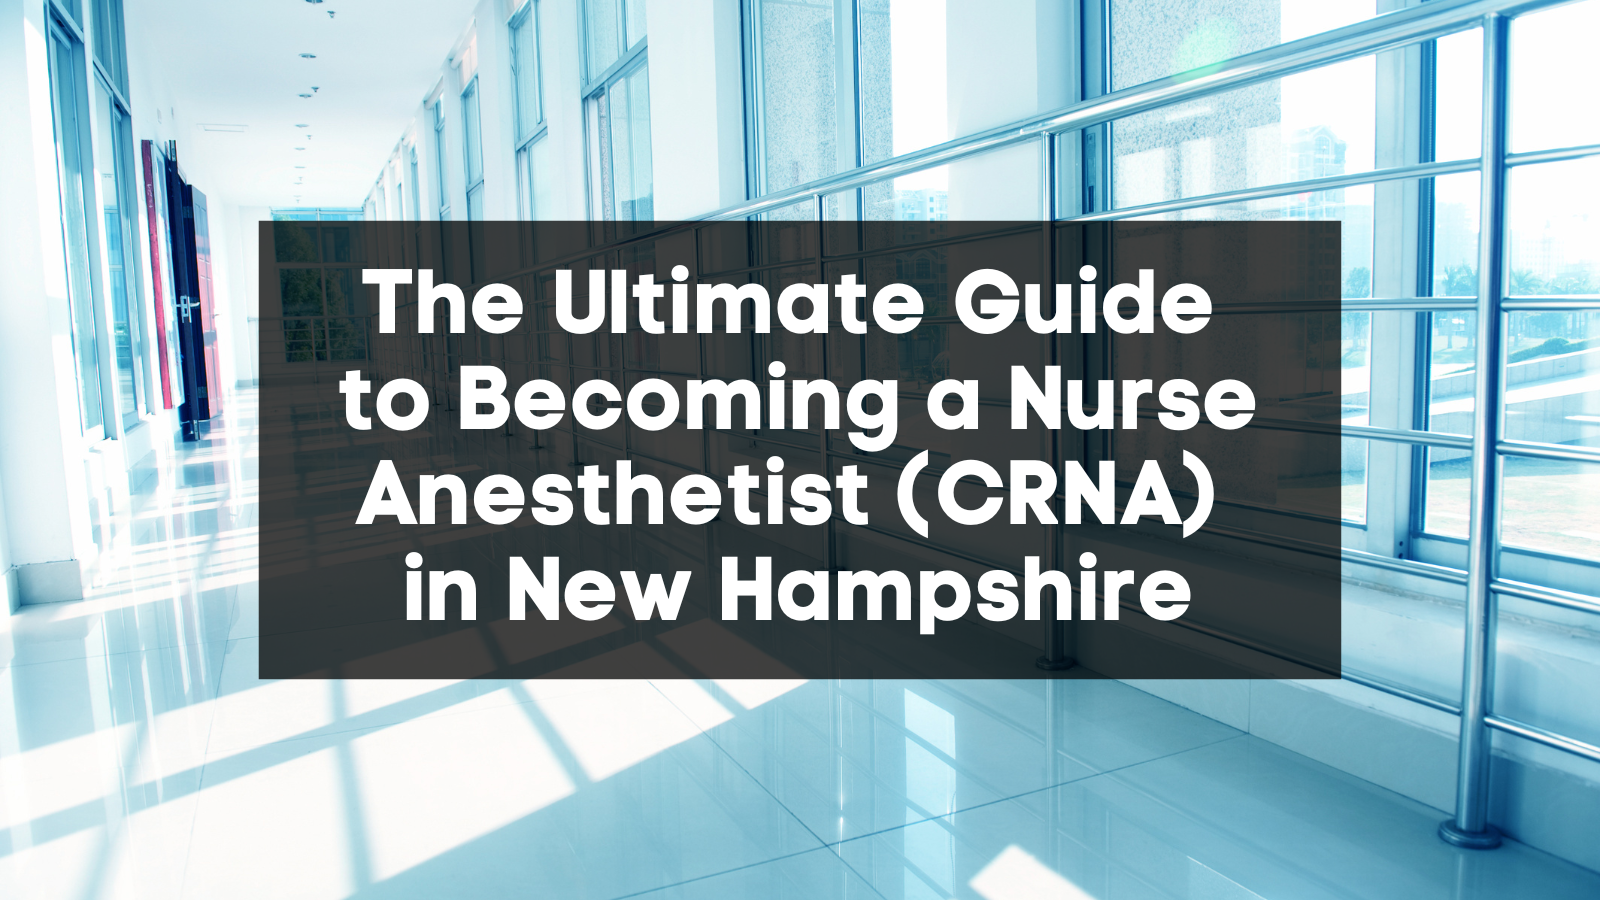 The Ultimate Guide to Becoming a Nurse Anesthetist (CRNA) in New Hampshire featured image